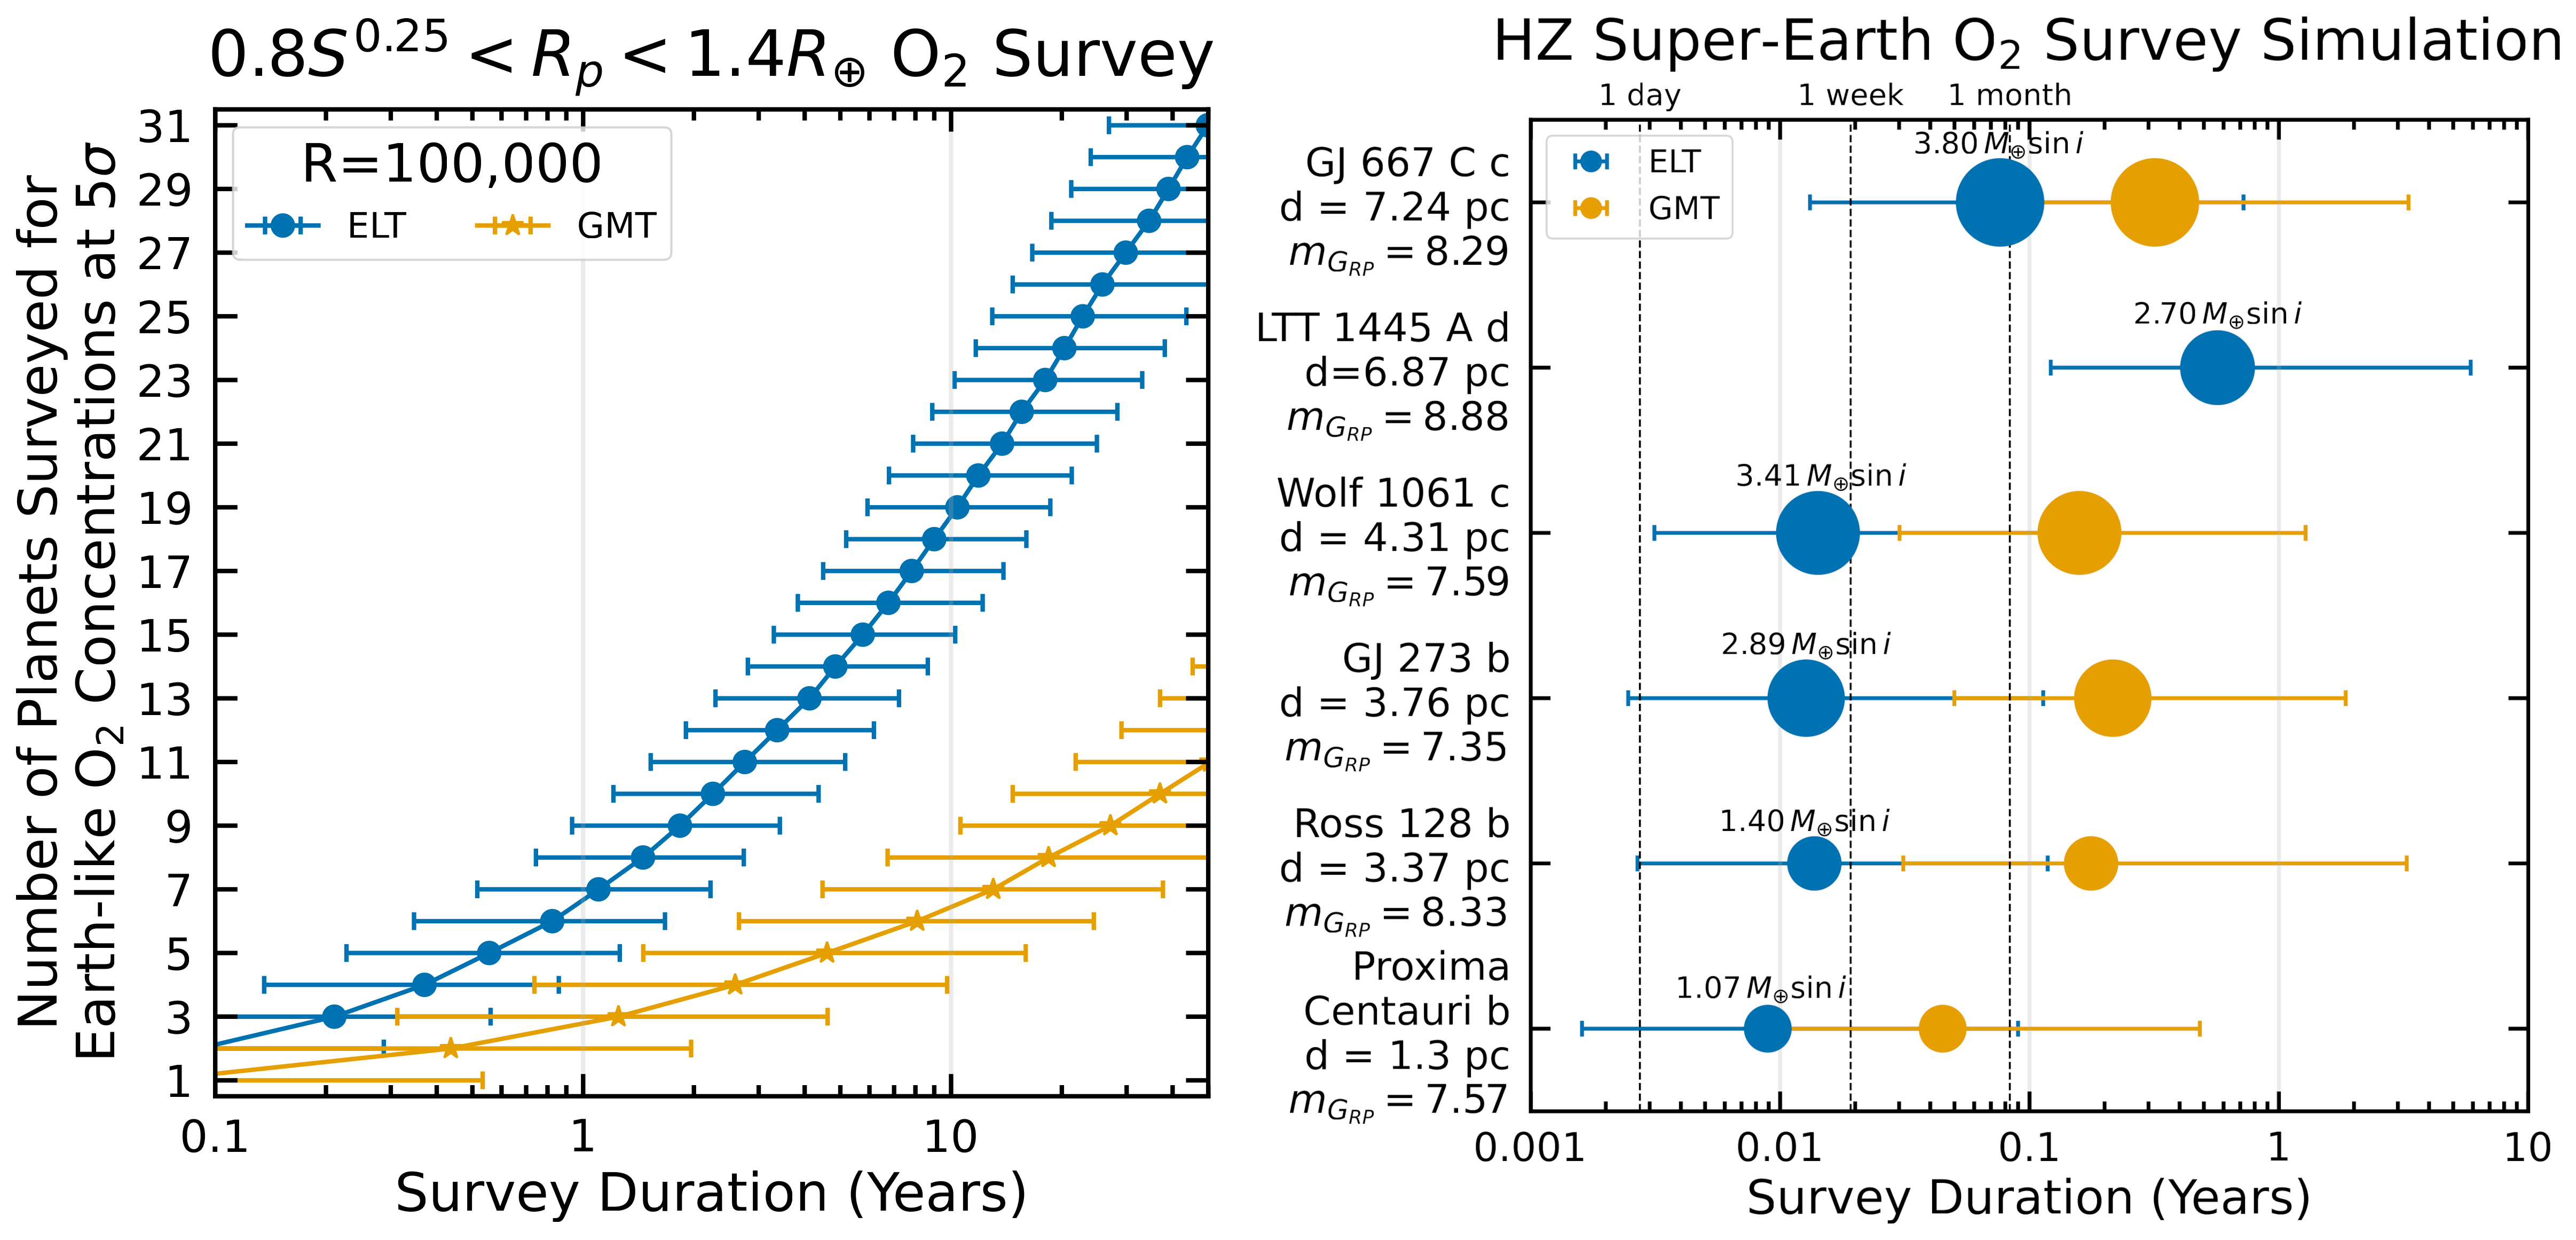 (Left) A simulation of the number of planets that can be probed for Earth-like levels of O2 on Earth-sized habitable-zone planets via direct imaging and high-resolution spectroscopy using the GMT (orange) and ELT (blue). In a 10-year survey, between ~7 (GMT) and 19 (ELT) planets could be probed. (Right) Survey duration to probe Earth-like levels of O2 on known nearby habitable zone super-Earth candidates. Four of these planets could be probed for O2 with a median observing time of less than 1 week on the ELT, and most of the planets could be probed for O2 with the GMT in a median time less than a few months with the GMT. The large uncertainties on these measurements are due to unknown planet (albedo) and orbital (e.g., inclination angle) parameters.